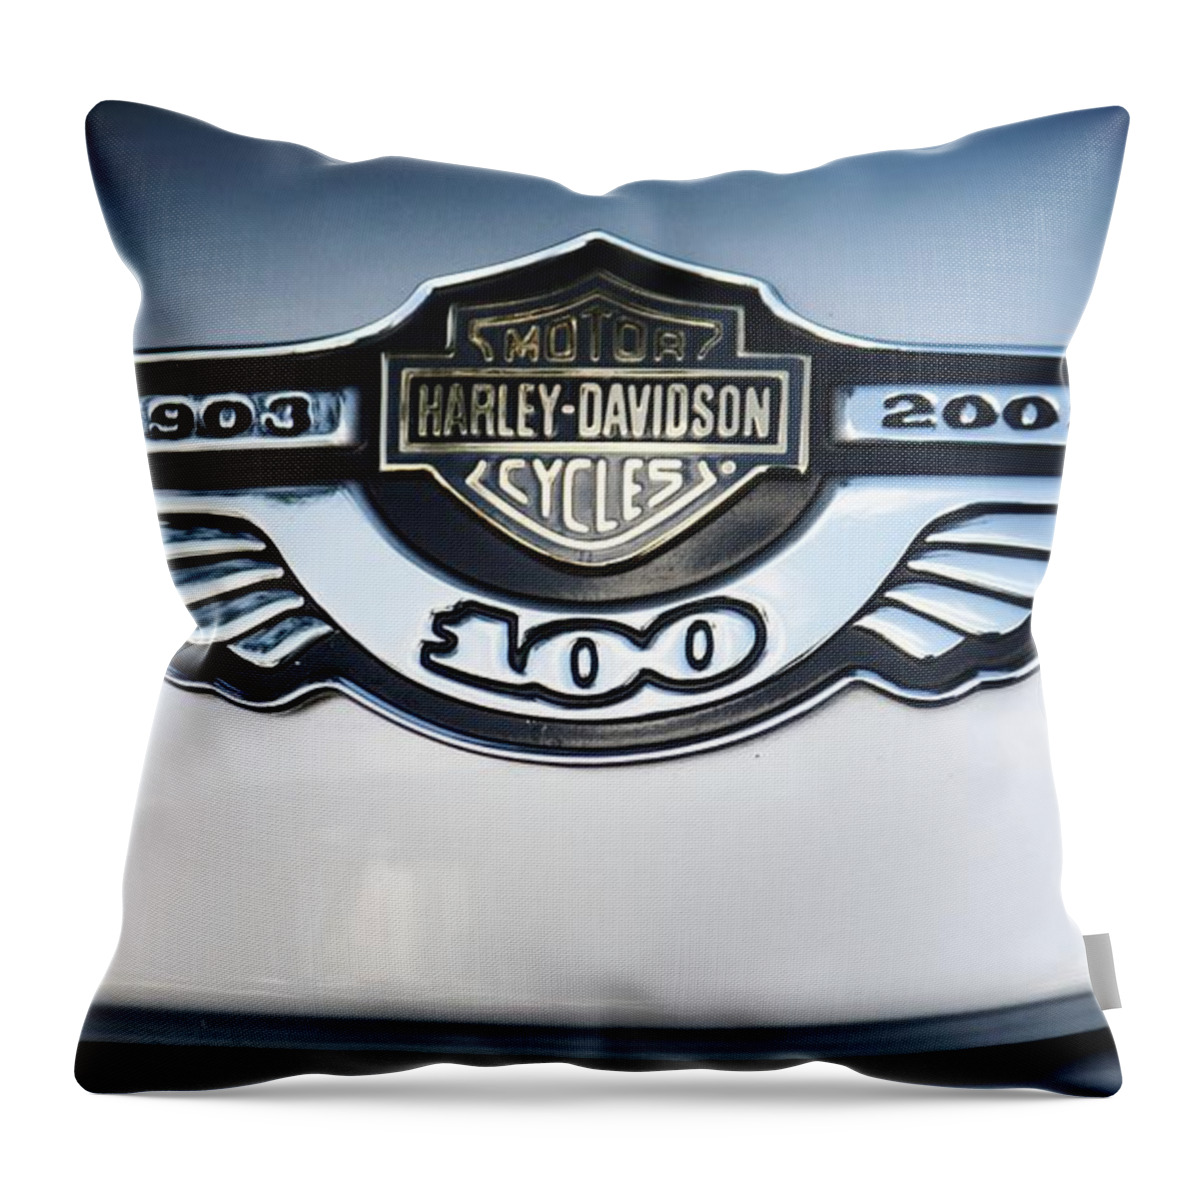 Harley Davidson Throw Pillow featuring the photograph 100 Years by Craig Wood